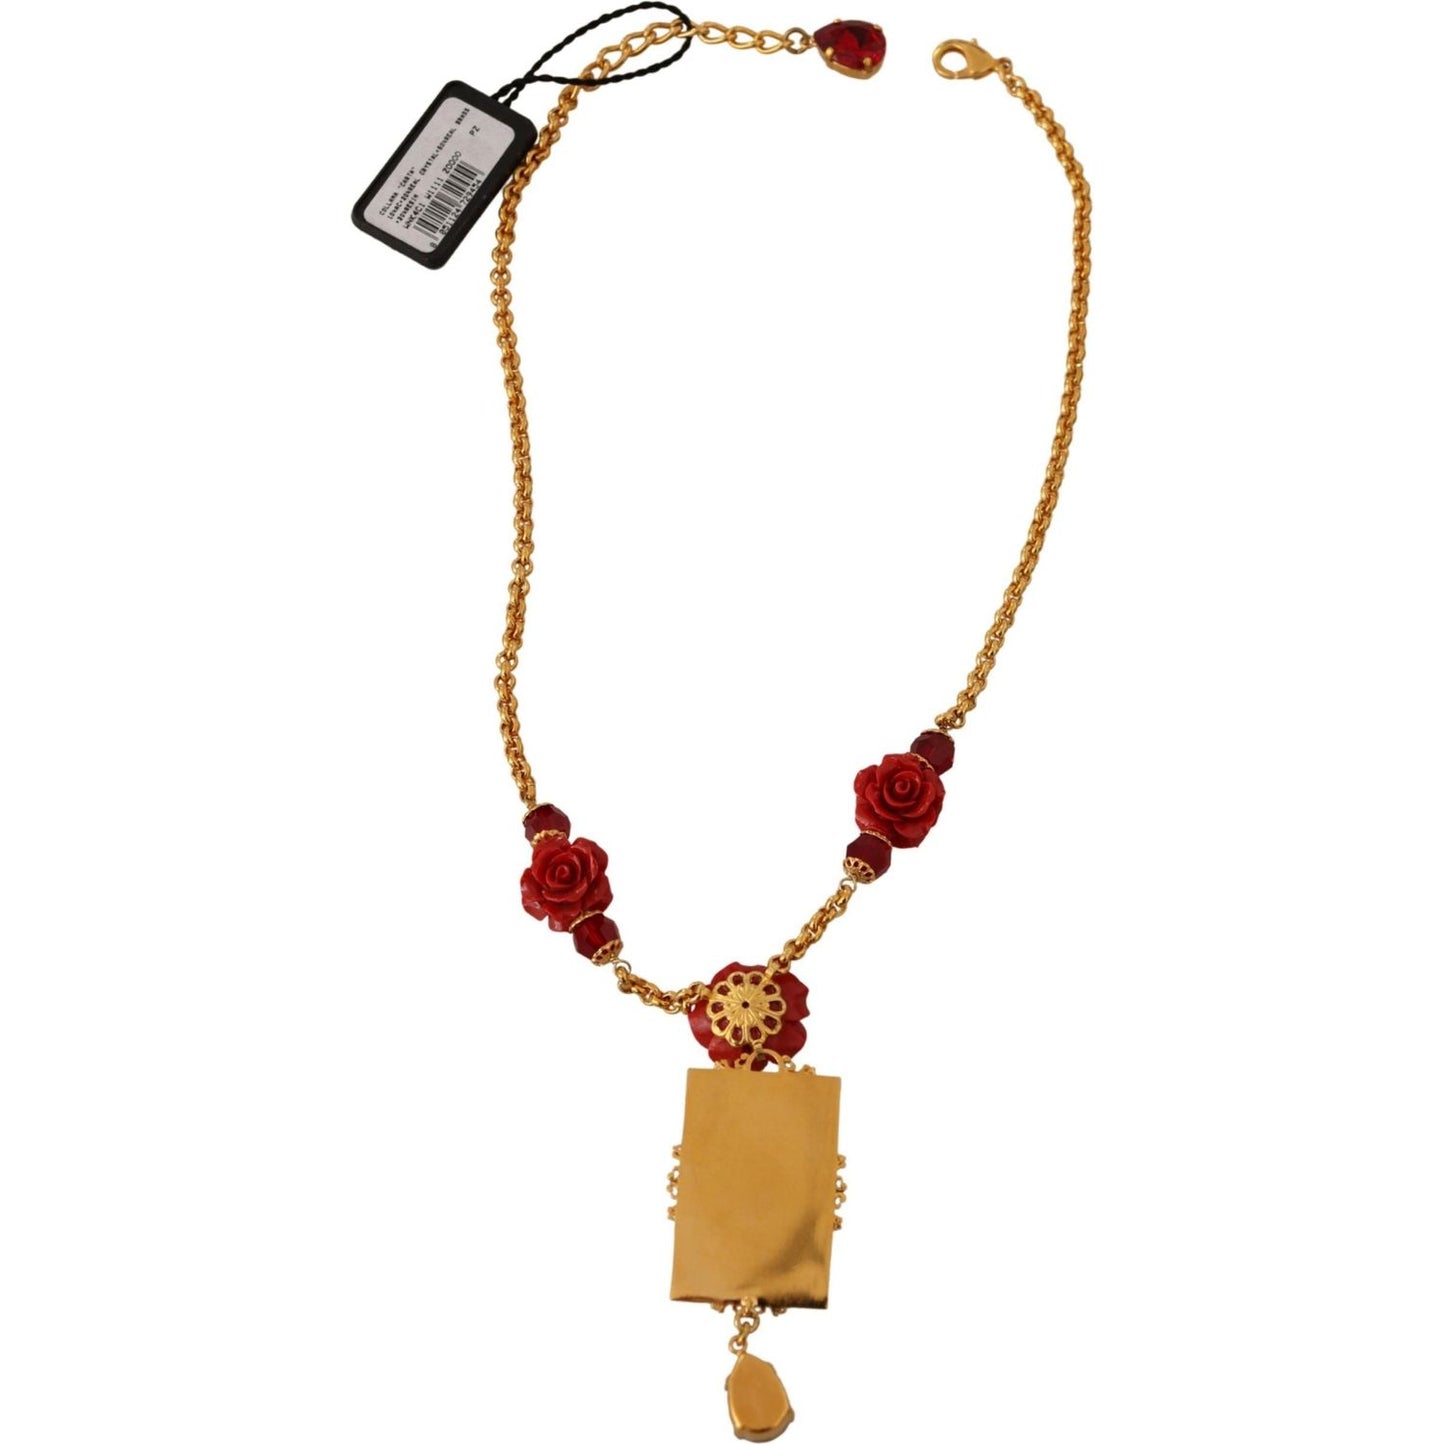 Gold Tone Charm Necklace with Crystal Pendant Dolce & Gabbana